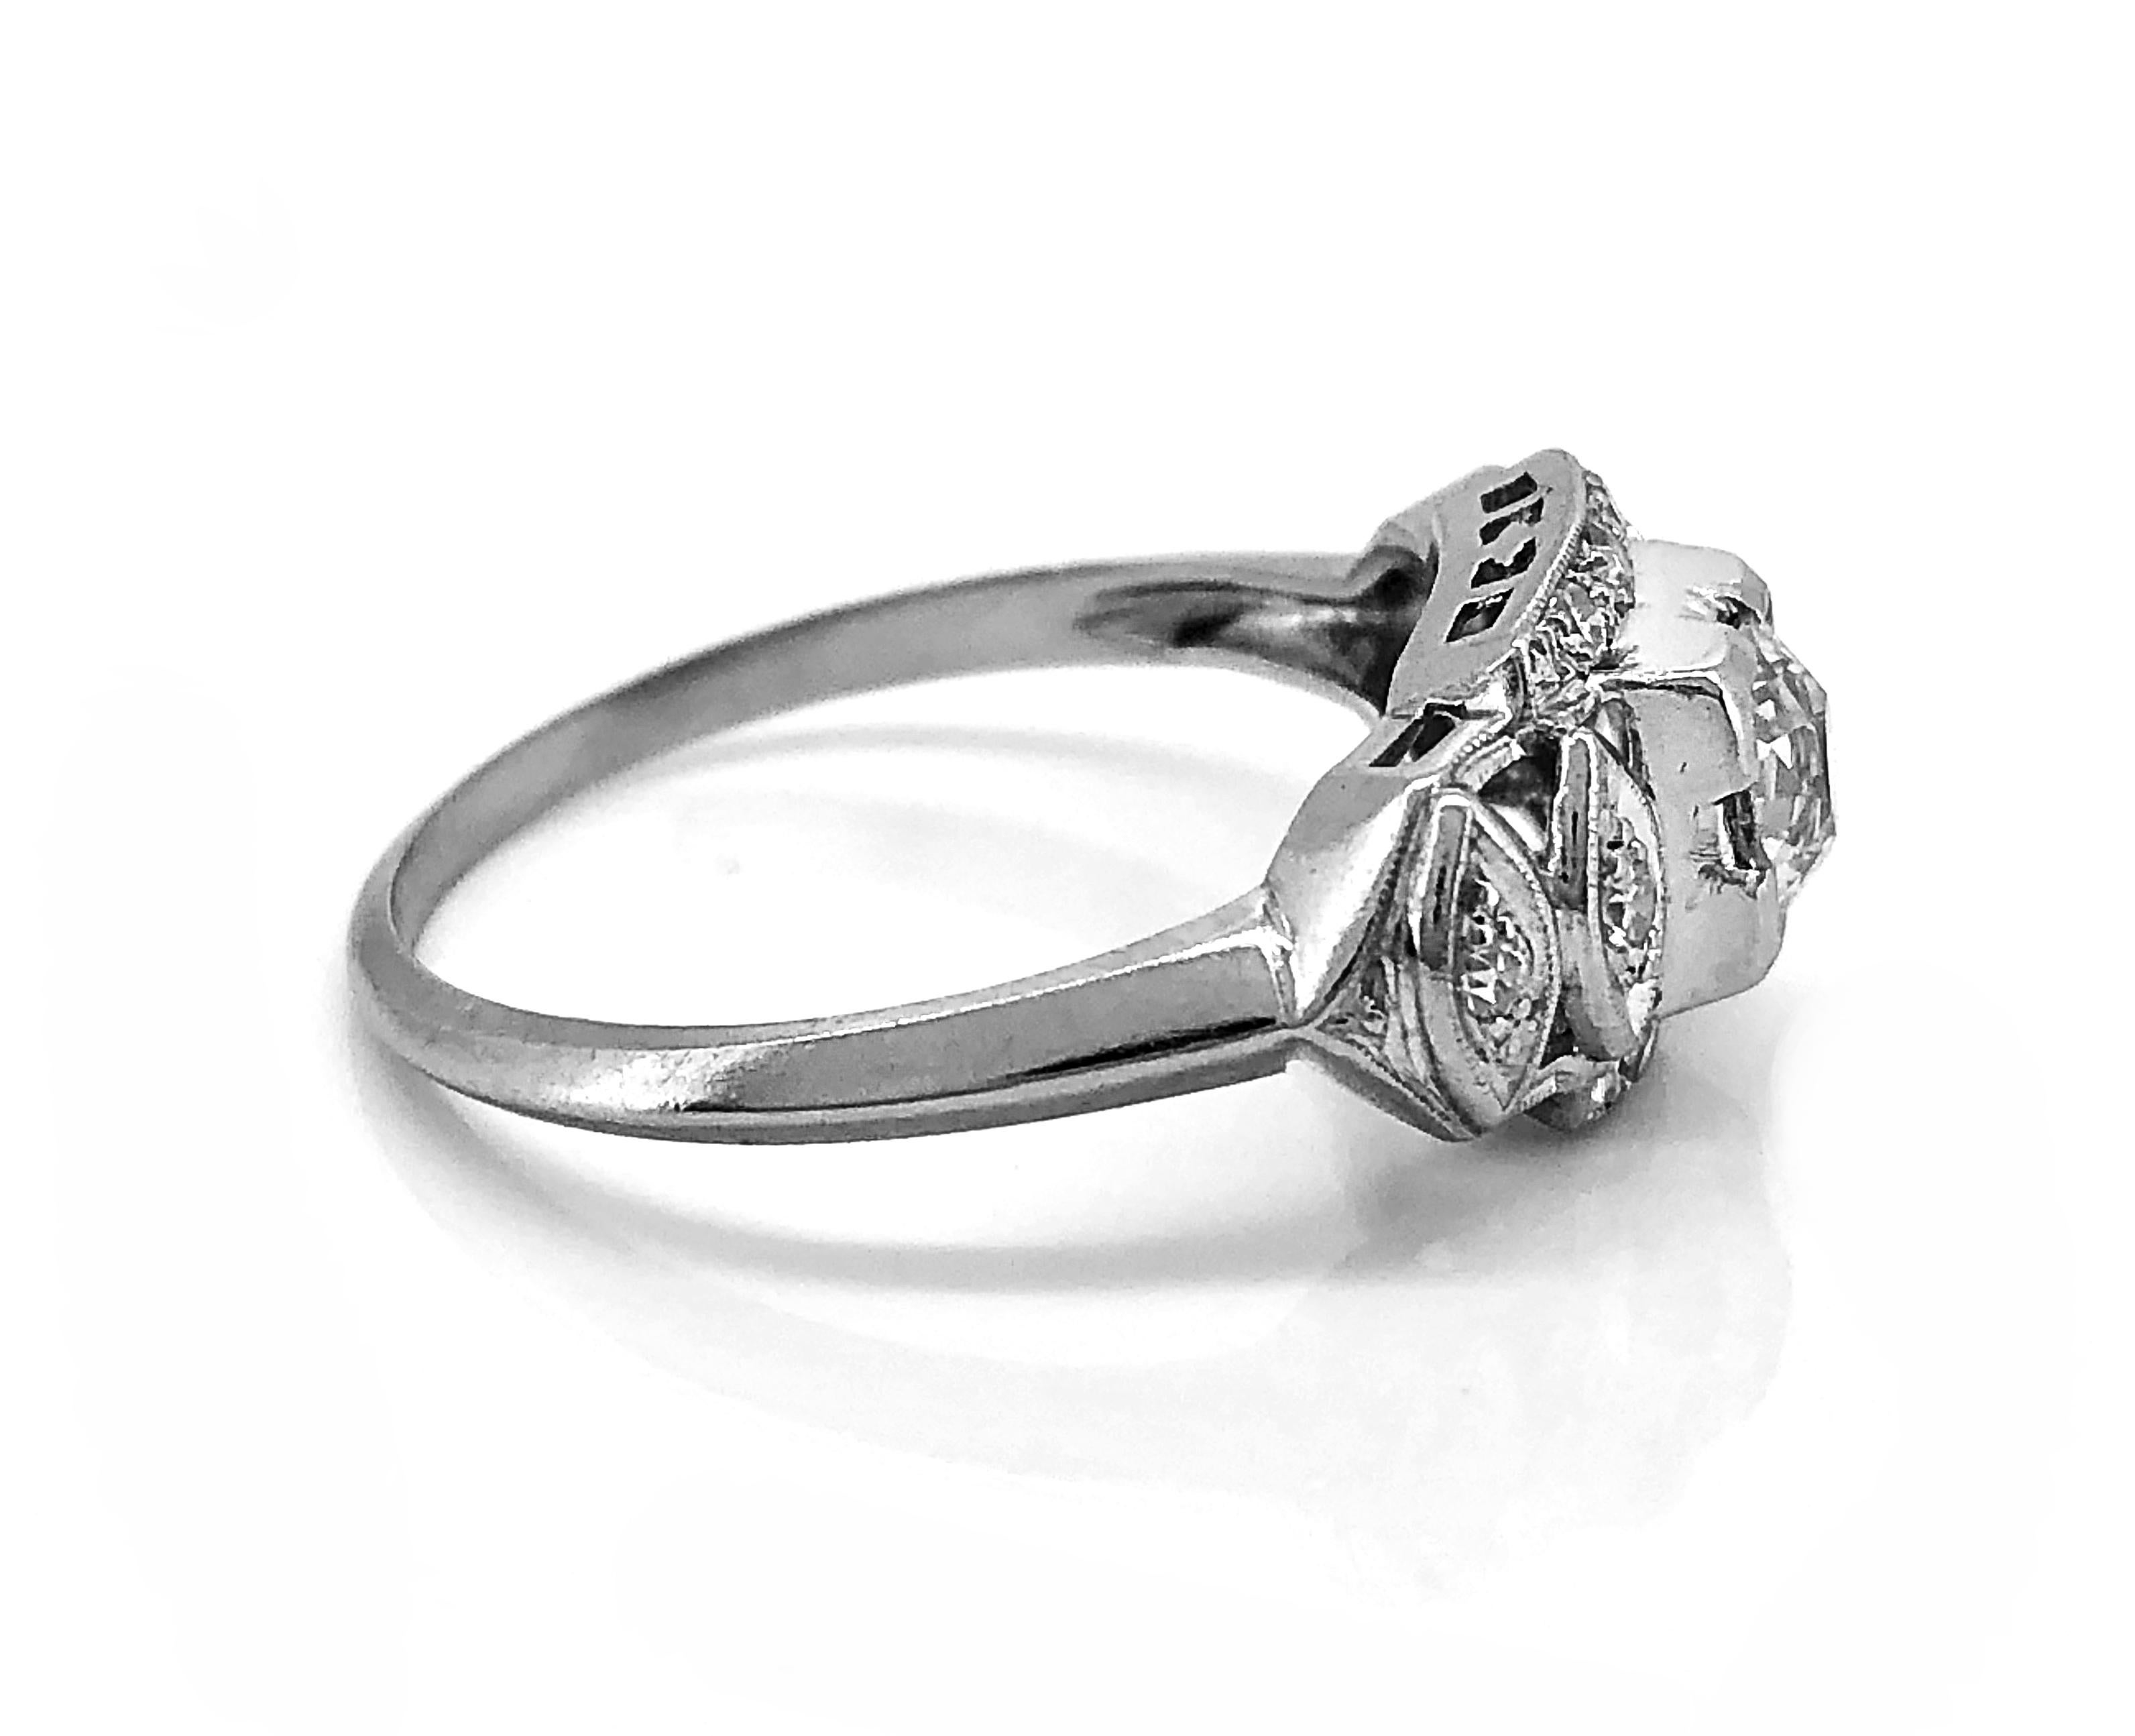 A feminine Art Deco diamond Antique engagement ring that features a .40ct. Apx. European cut diamond with VS1 clarity and H color. The Platinum mounting, which is delicately pierced and milgrained, is accented with .15ct. Apx. T.W. of single cut